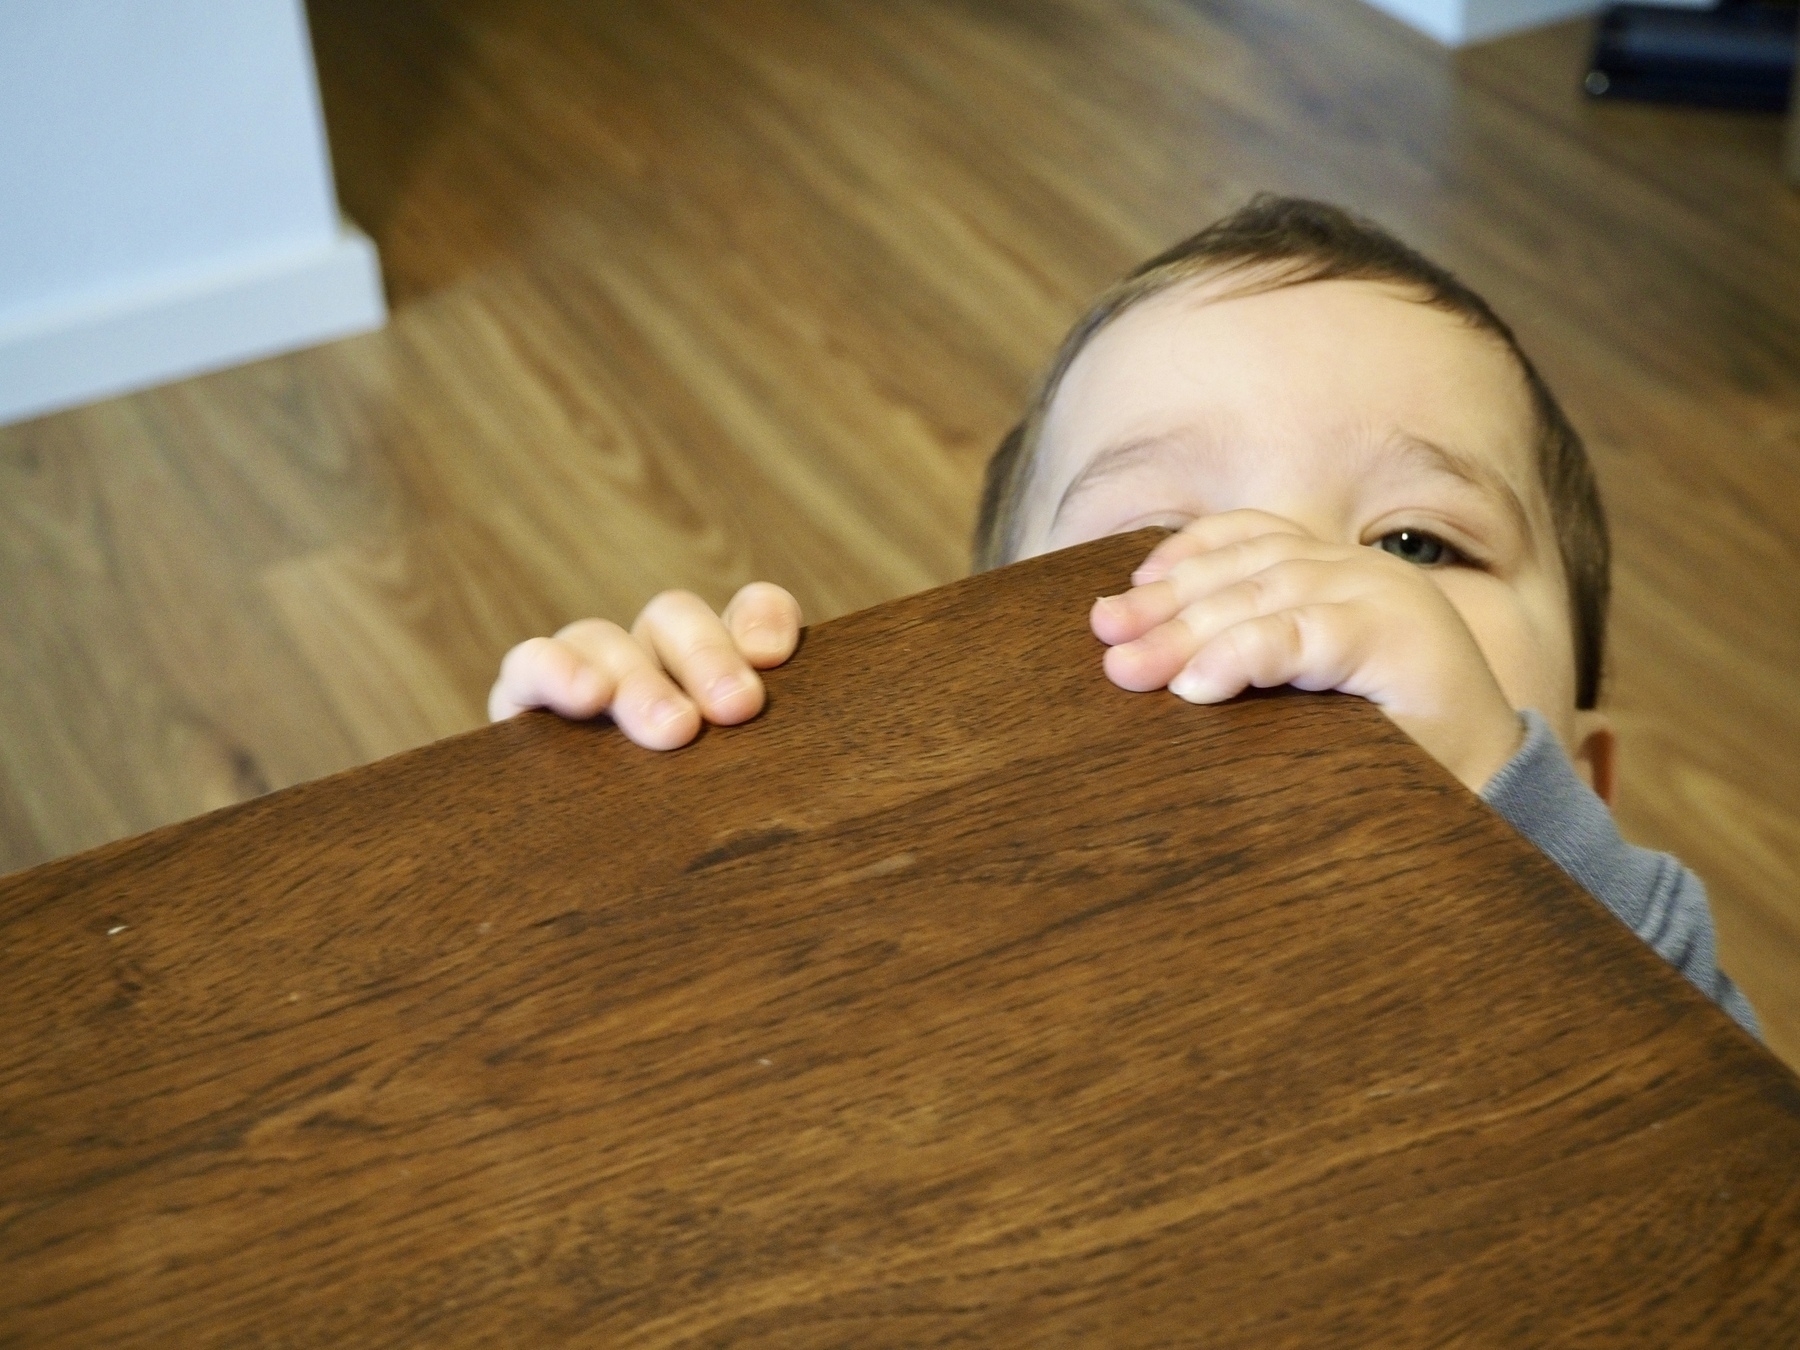 A toddler peers over the corner edge of a wooden dining table.